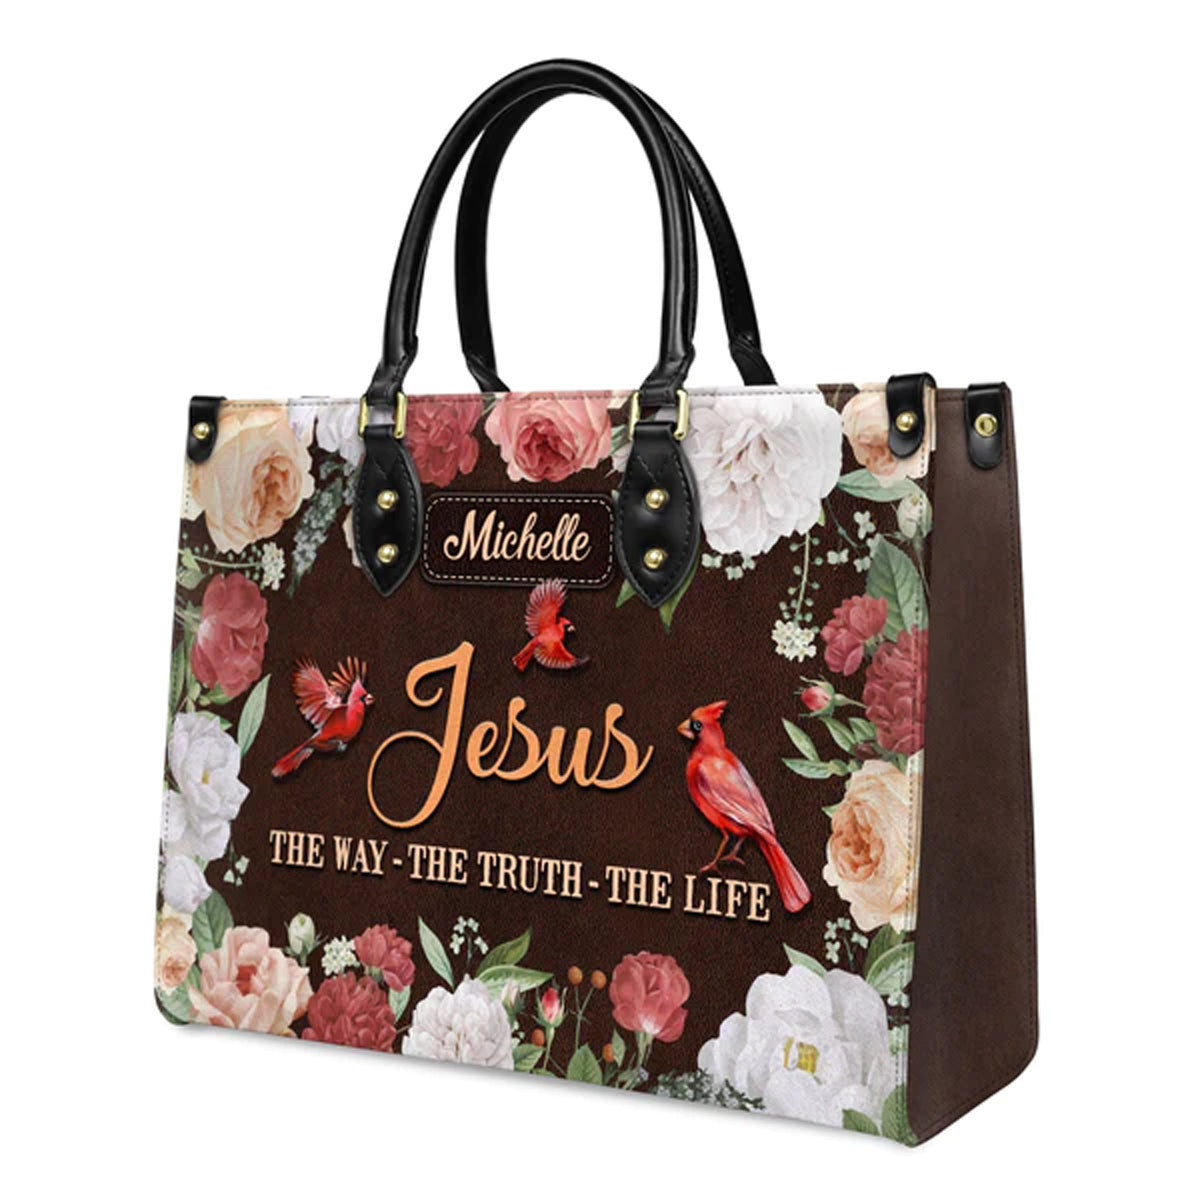 Christianart Designer Handbags, Jesus The Way The Truth The Life Cardinal Vintage Flower, Personalized Gifts, Gifts for Women, Christmas Gift. - Christian Art Bag